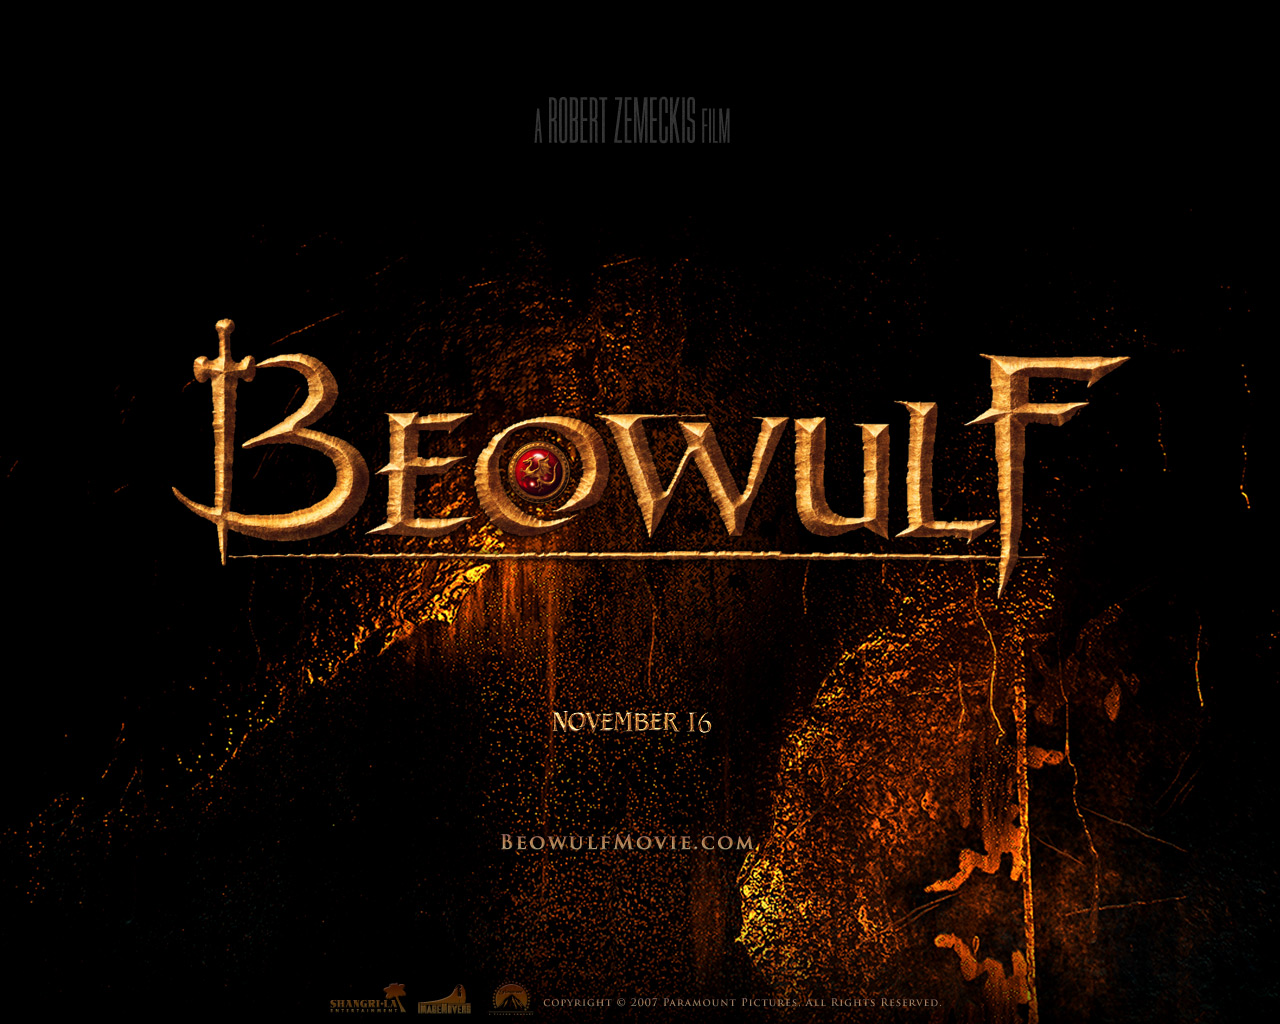 Beowulf Wallpapers